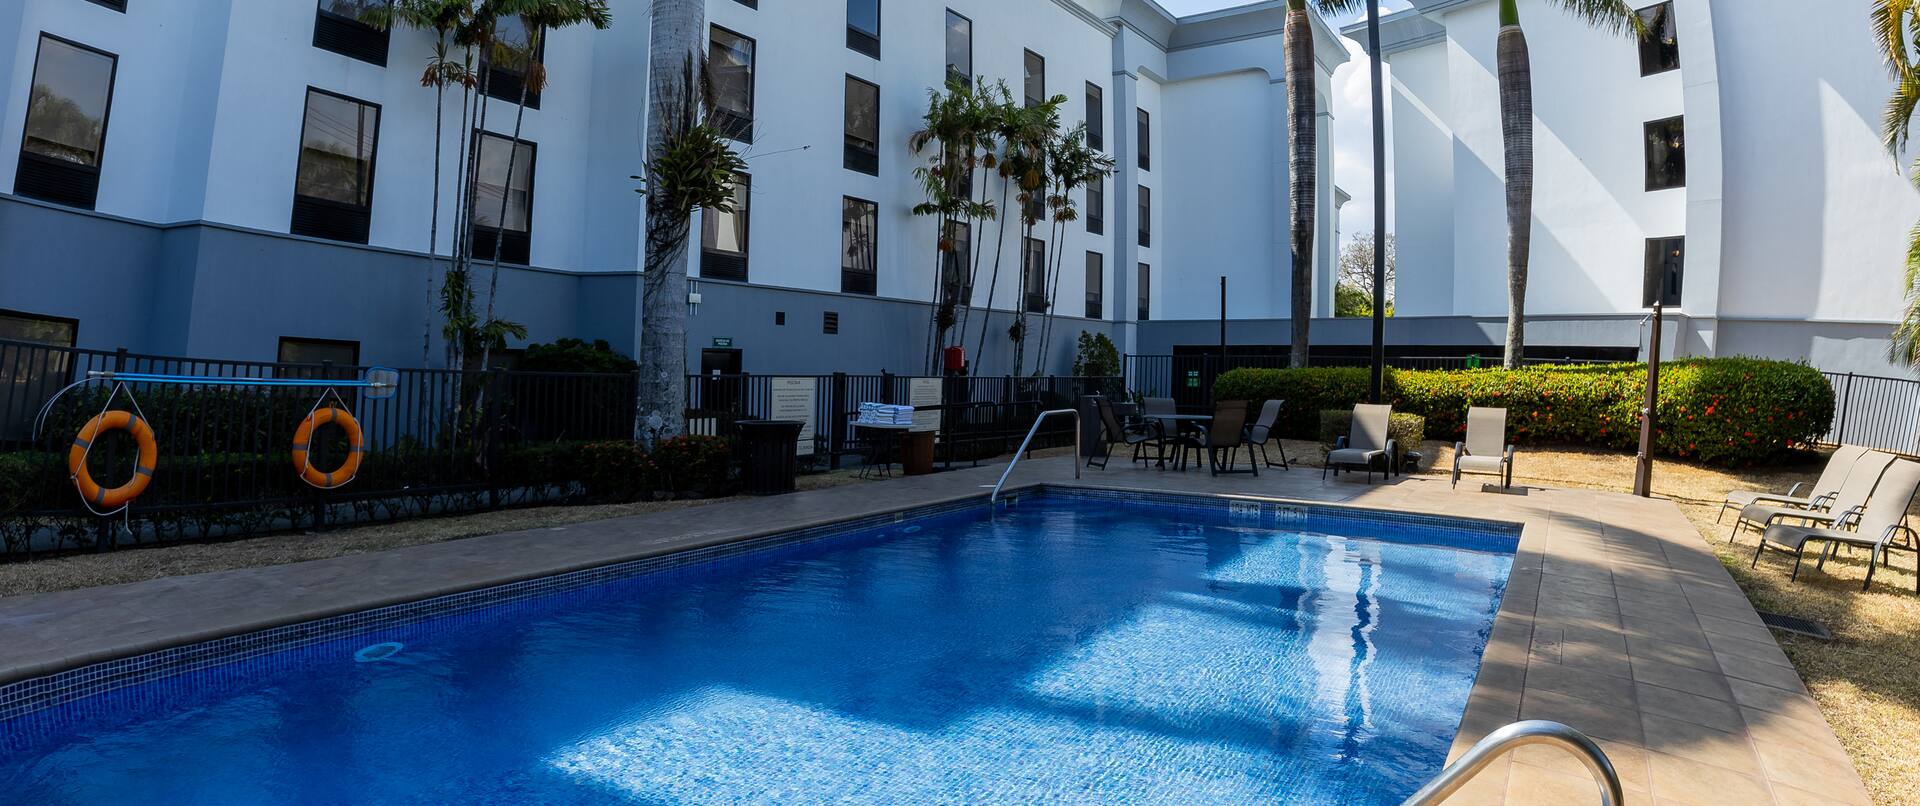 Hotel Exterior and Outdoor Pool Area